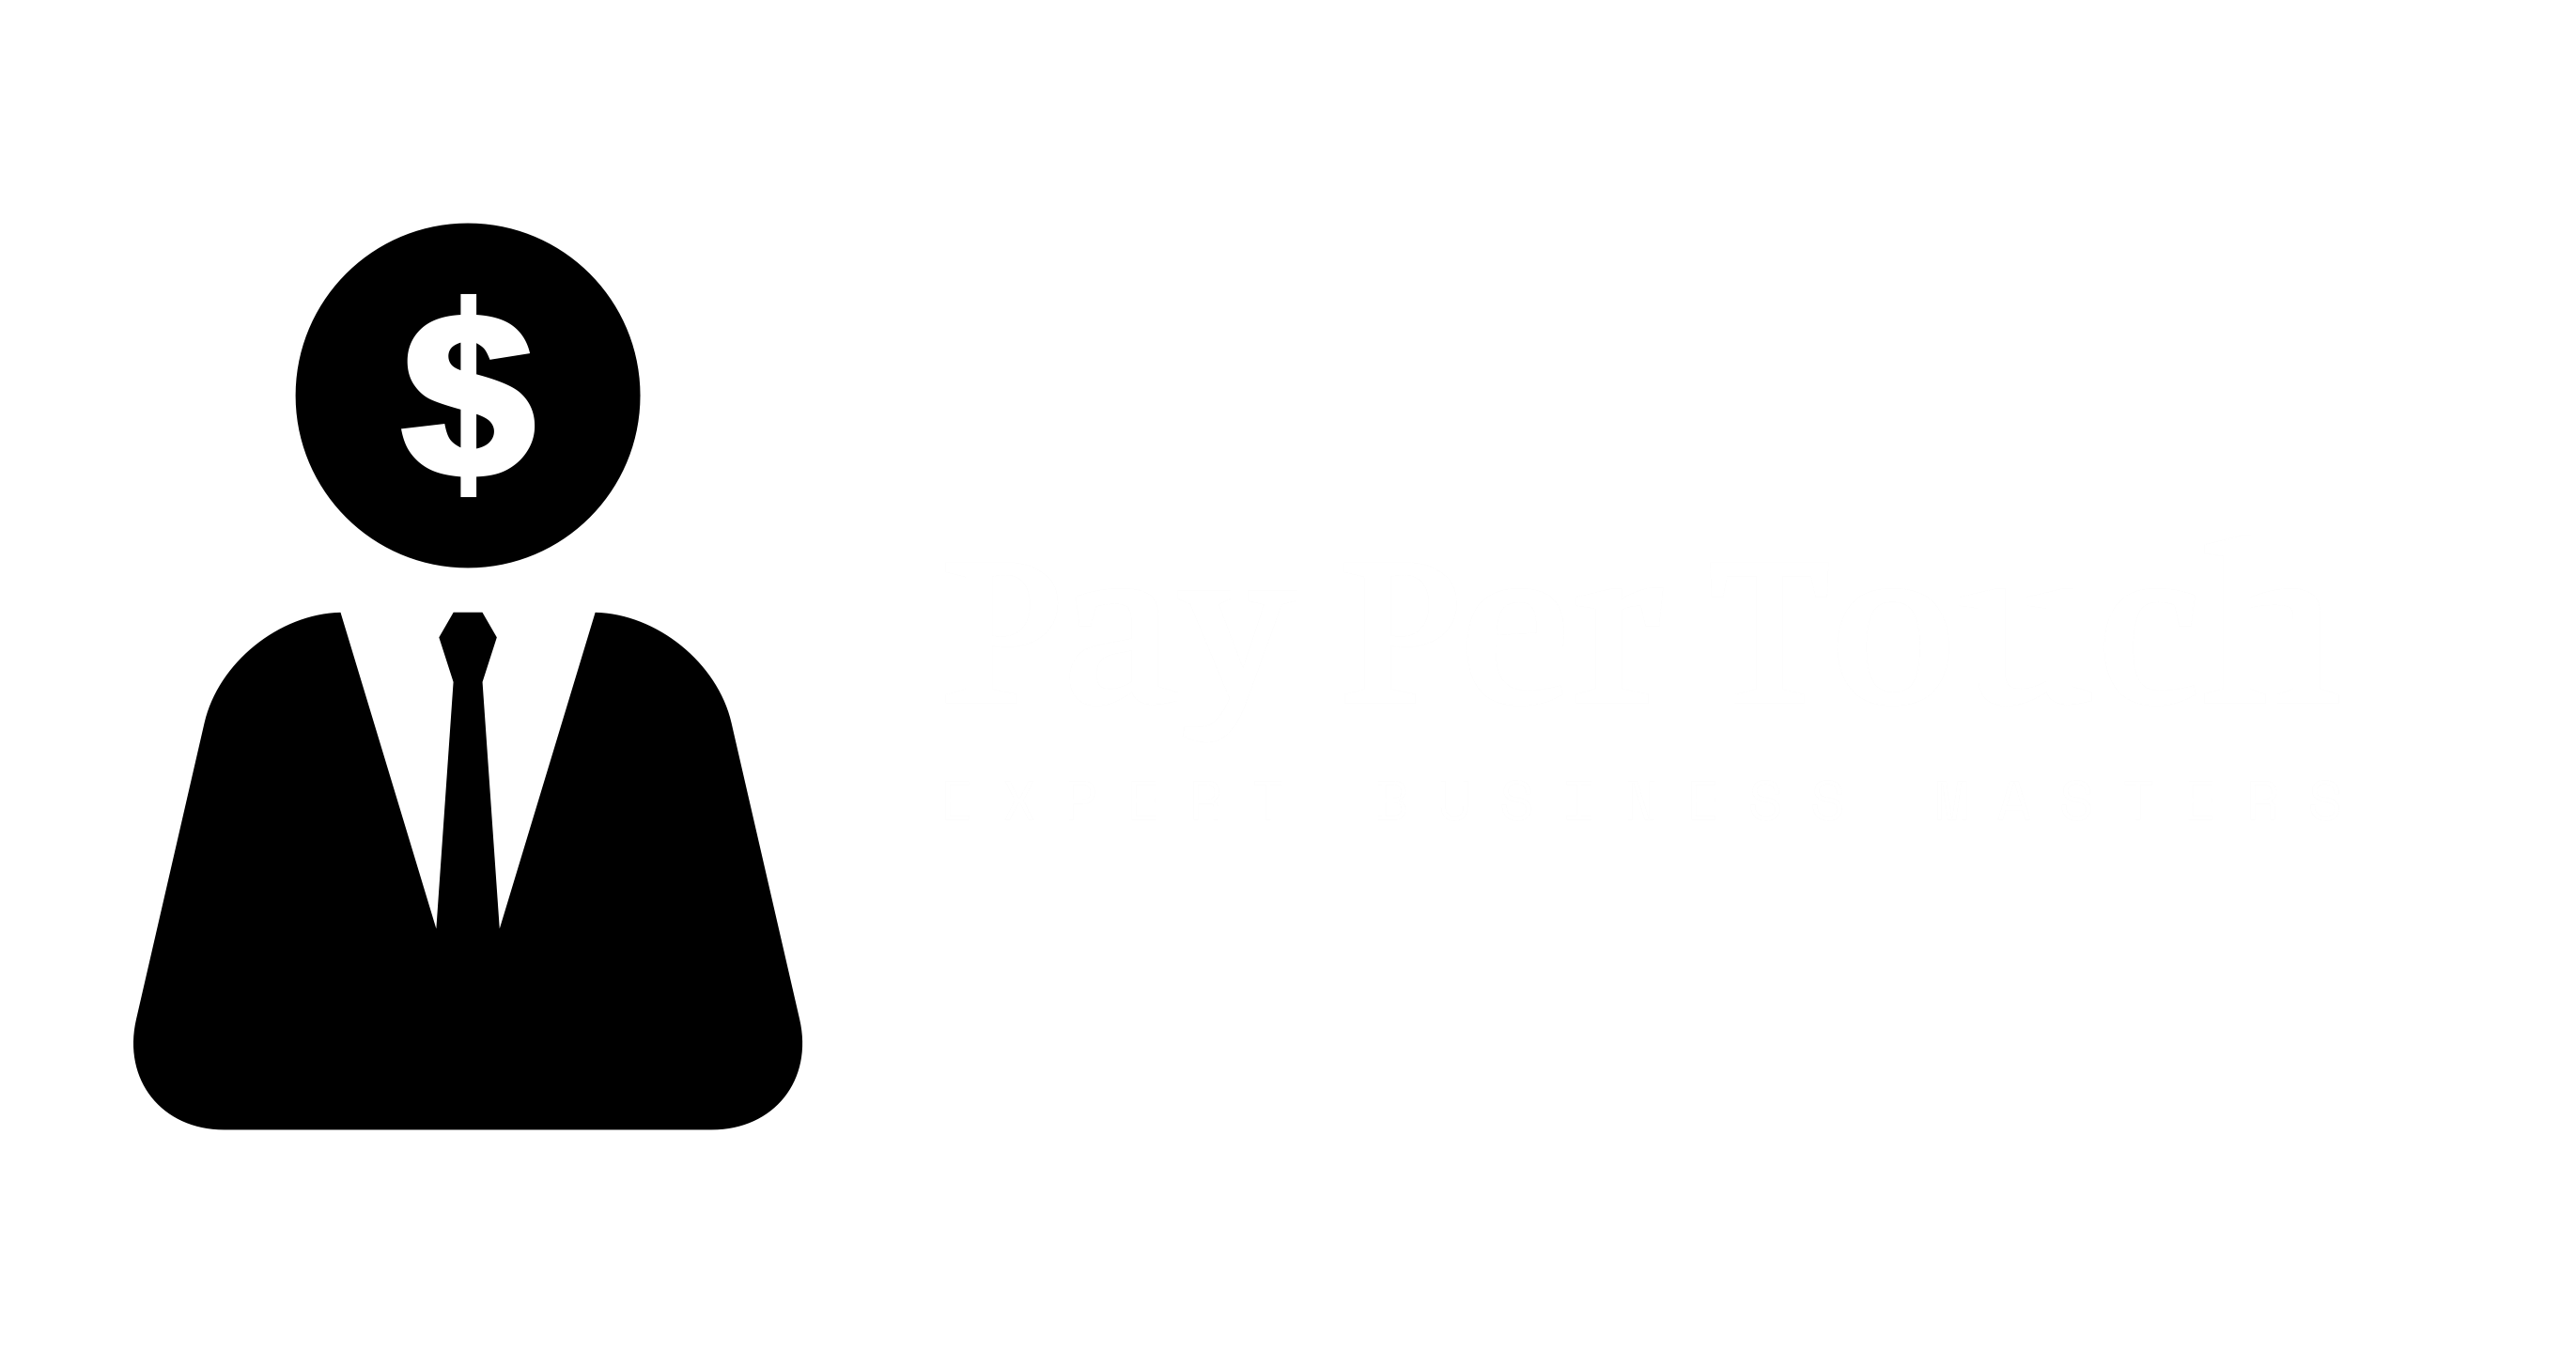 Pay Per Touch